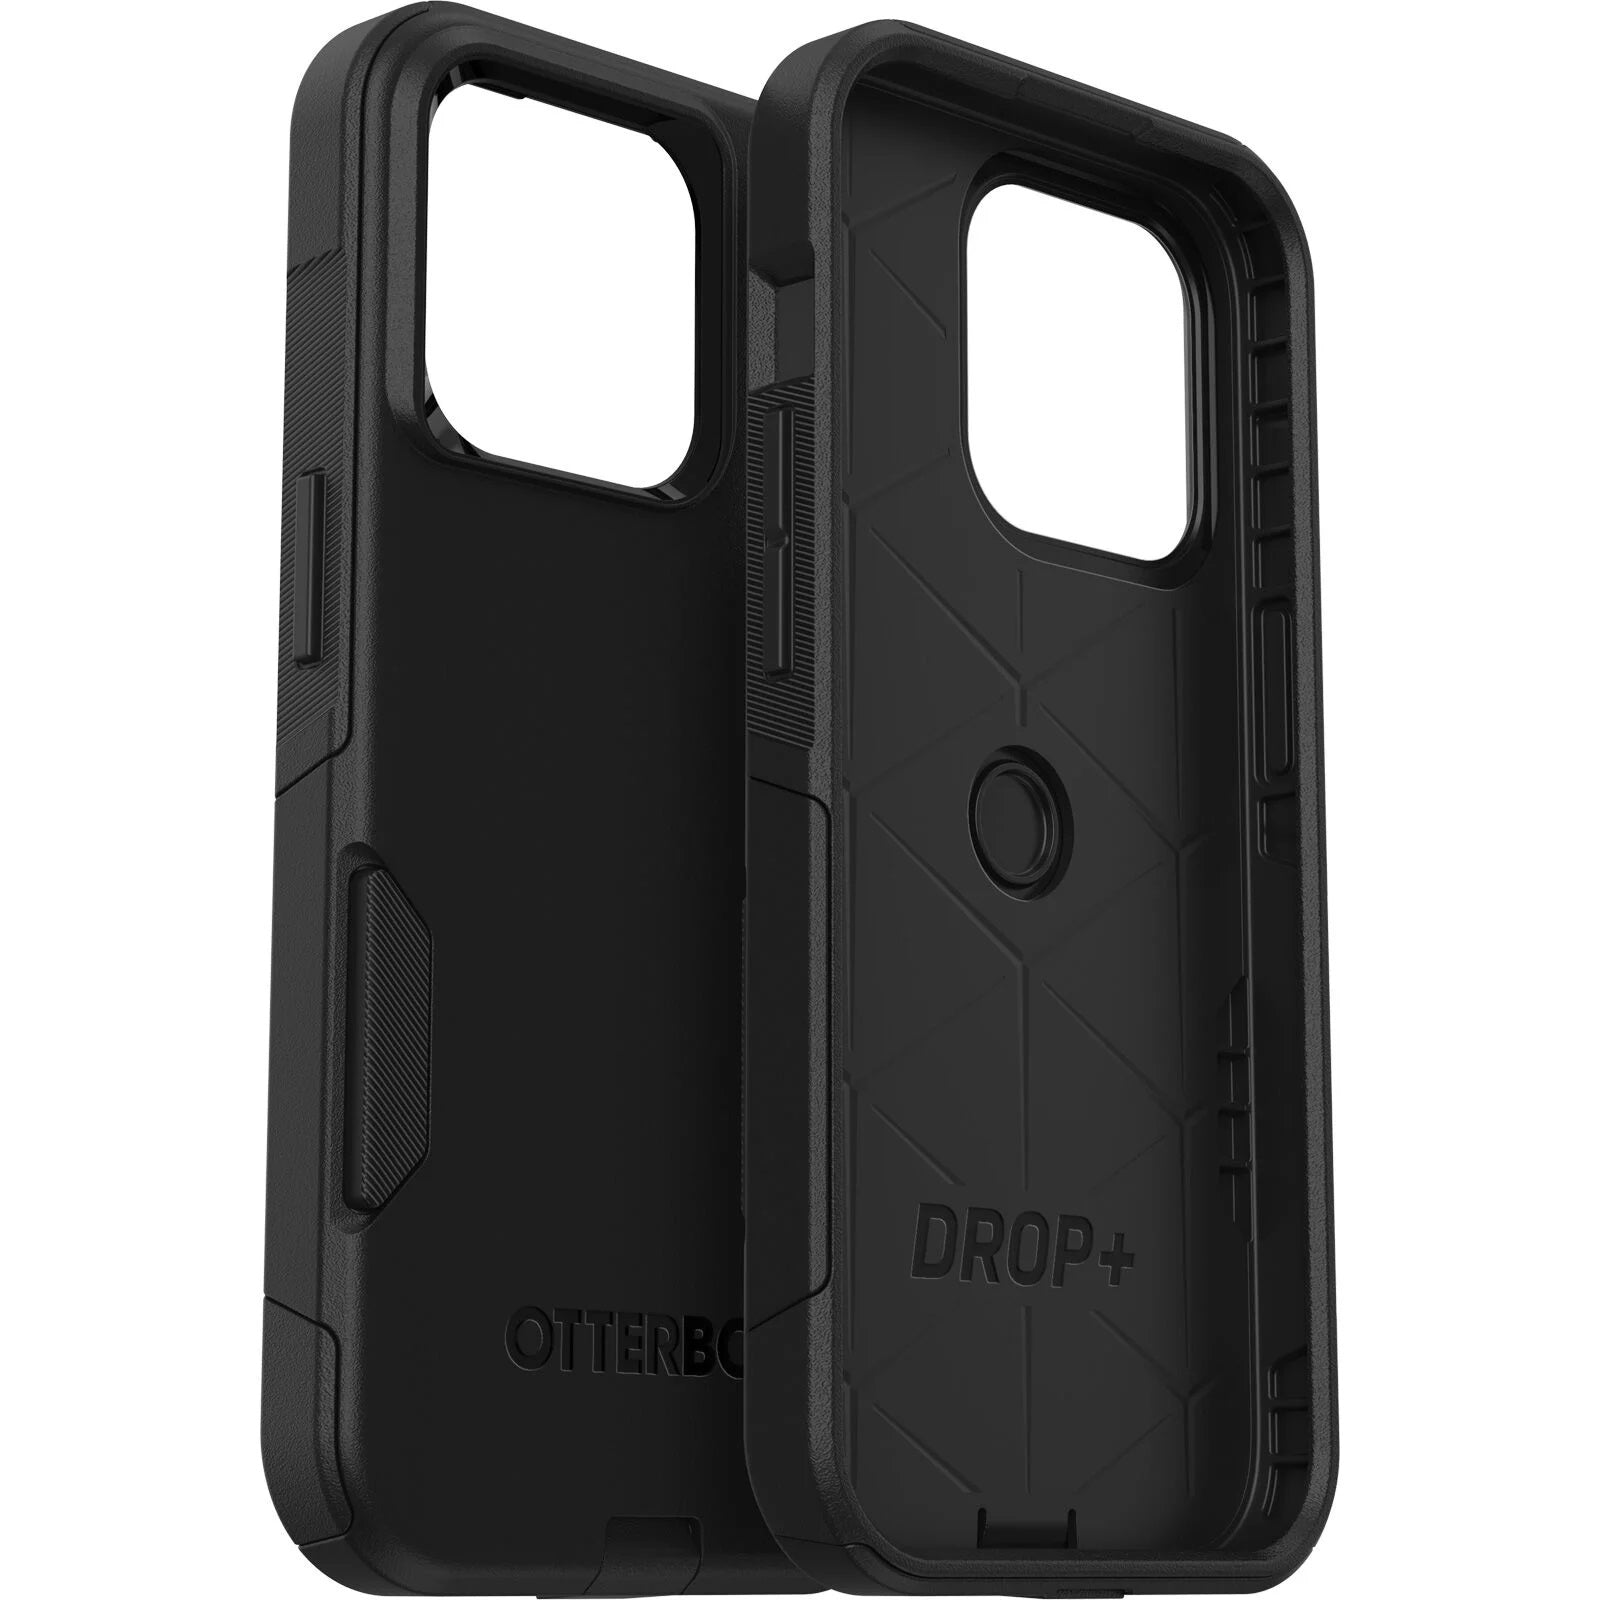 OTTERBOX Apple iPhone 14 Pro Commuter Series Antimicrobial Case - Black (77-88421), 3X Military Standard Drop Protection, Secure Grip